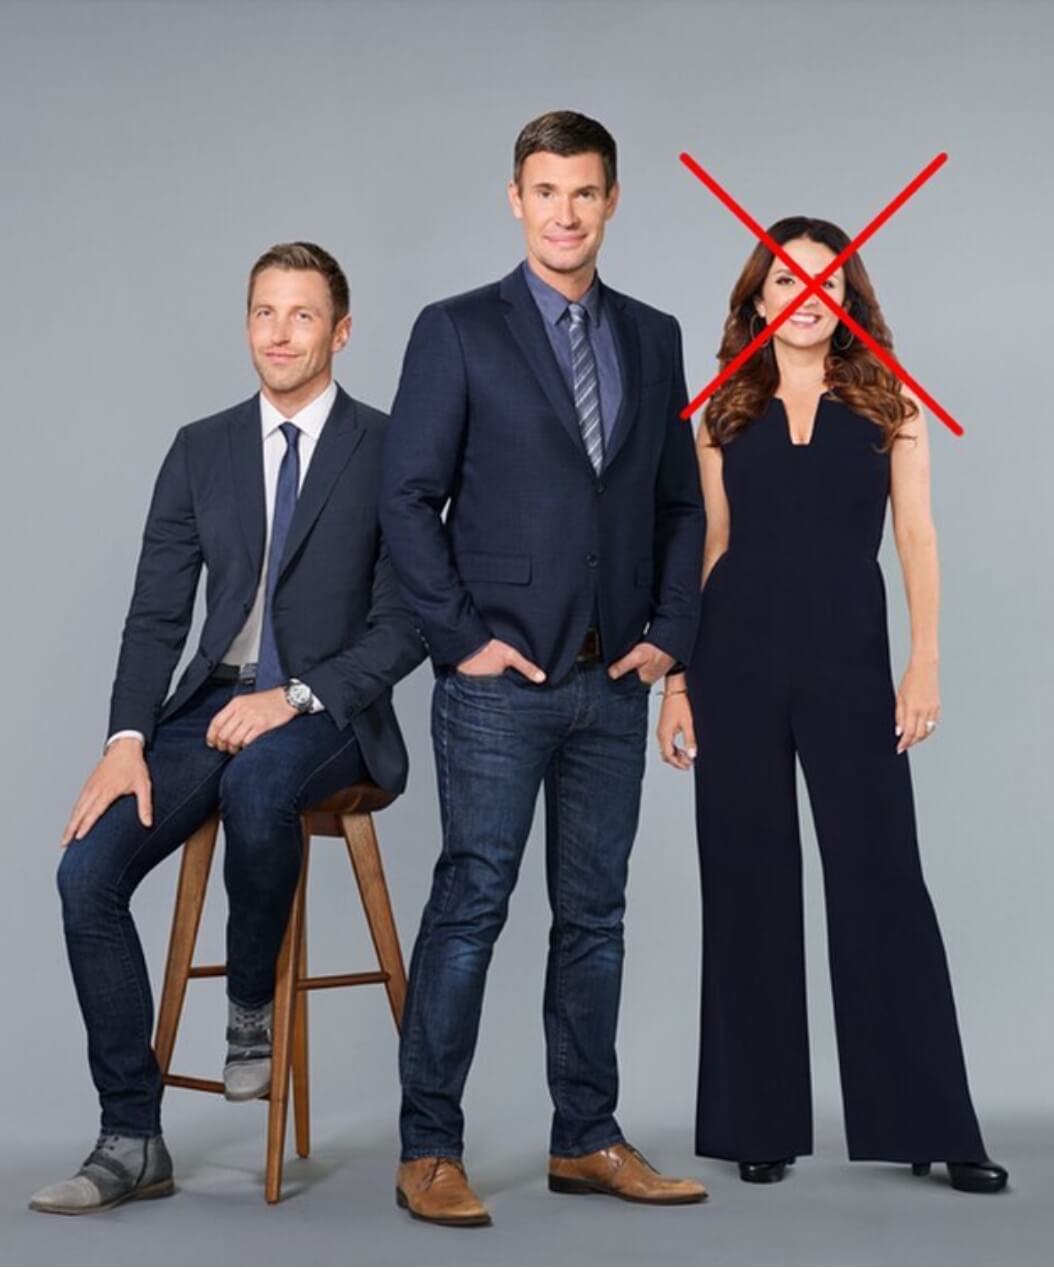 Jeff Lewis Shades Jenni Pulos Ahead of ‘Flipping Out’ Premiere Tonight!